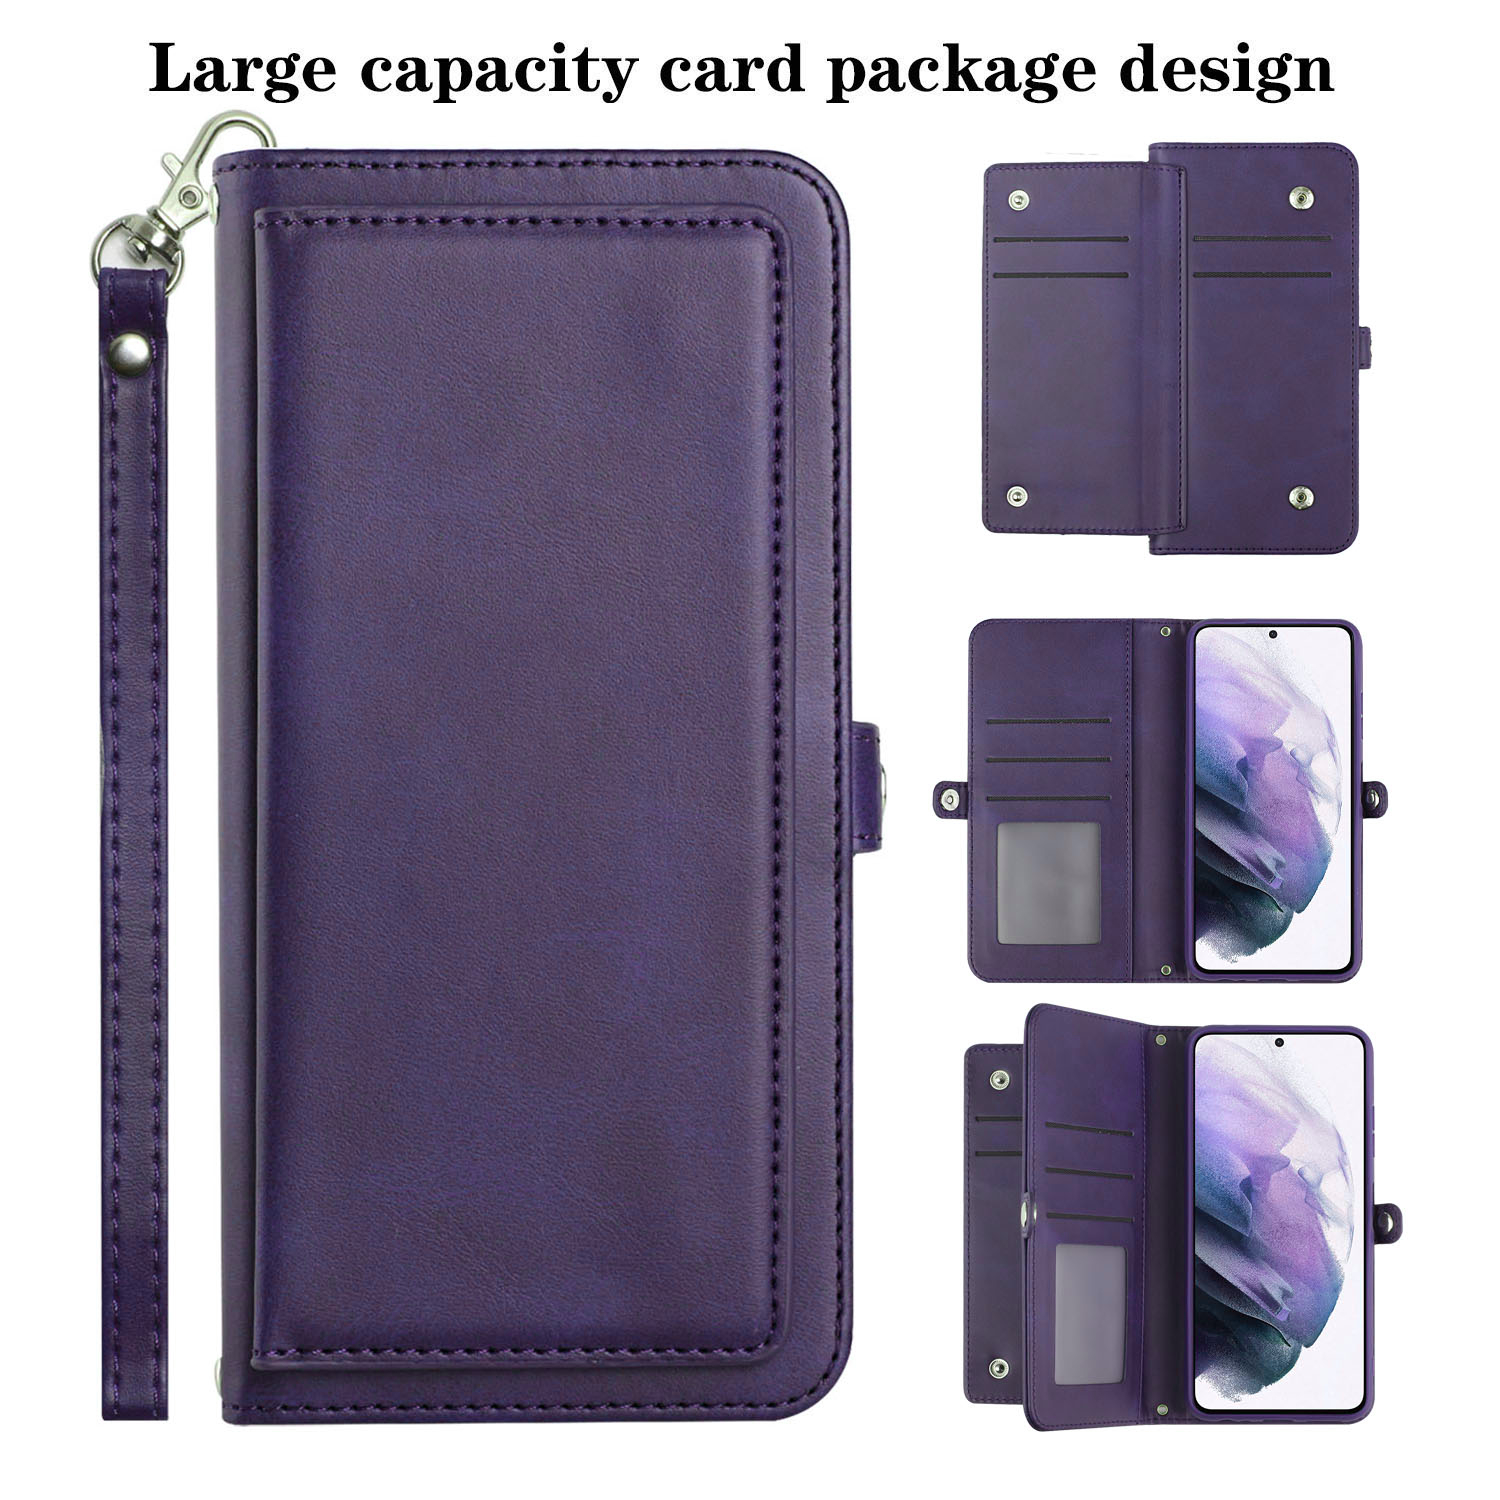 Premium PU LEATHER Folio WALLET Front Cover Case with Card Slots Galaxy S22 Ultra 5G (Purple)